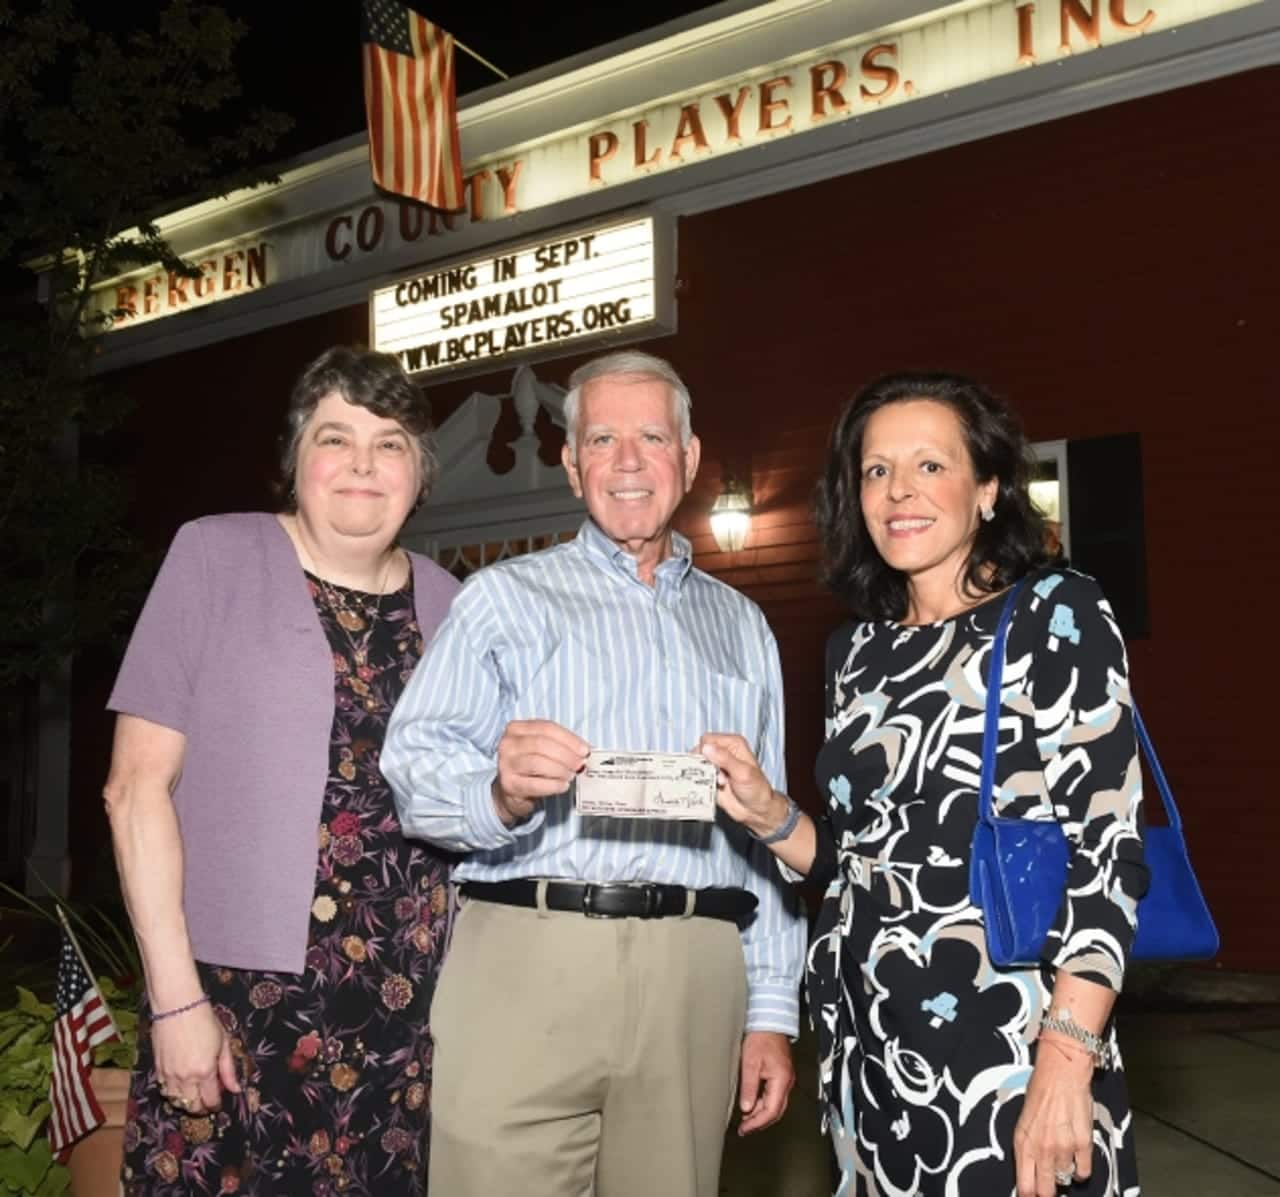 Lynne Lupfer, President of the Bergen County Players; Sheldon Stone, Bergen County Players Charity Chair; Sandy Carapezza, Director of Development at The Valley Hospital Foundation.